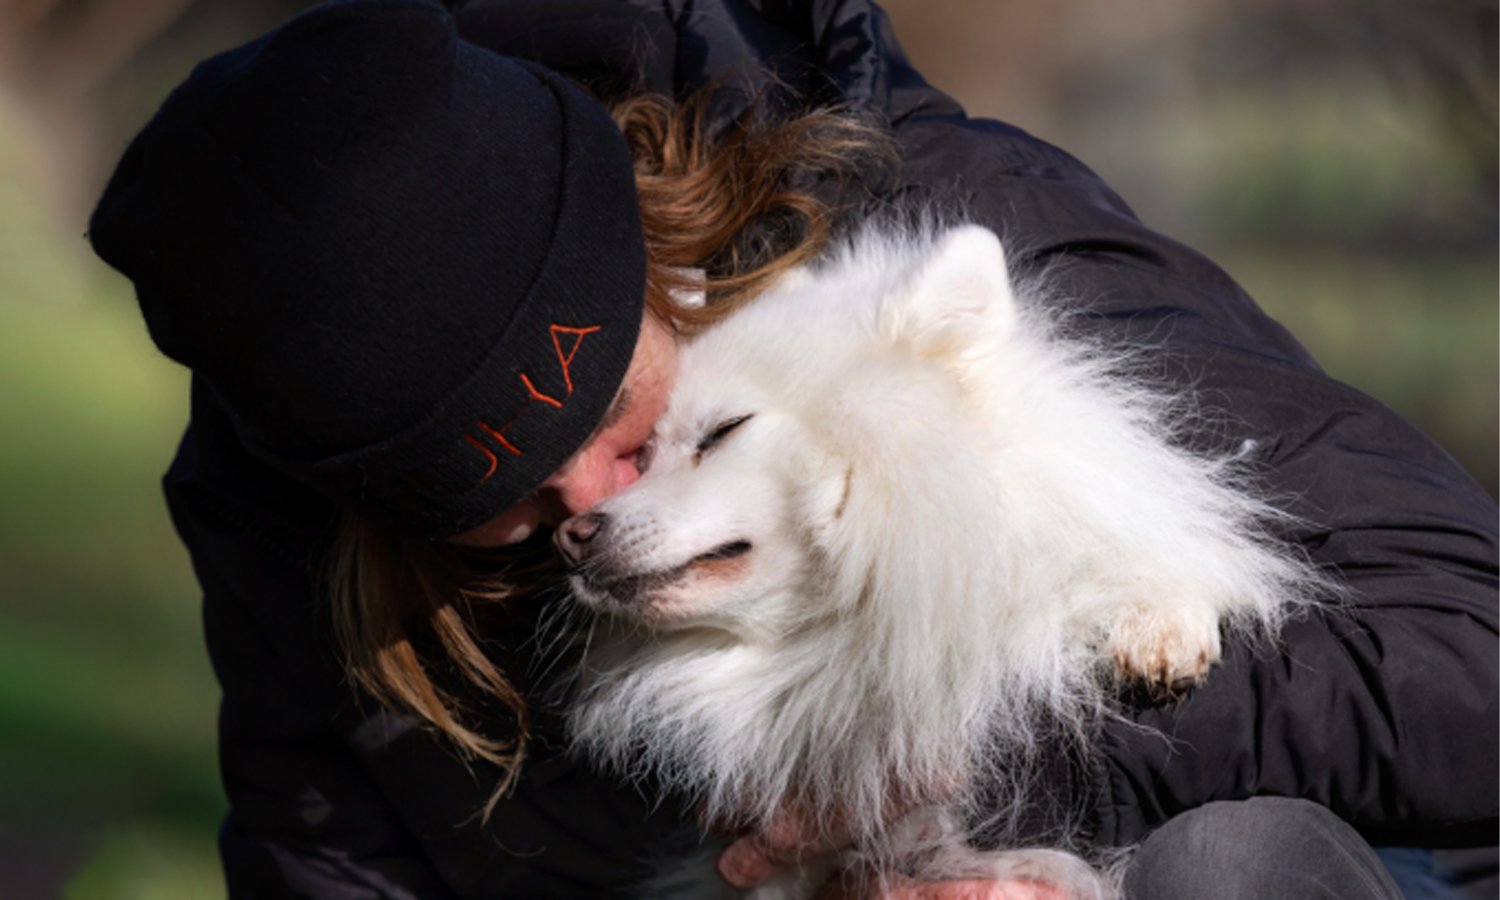 Lady in a warm jacket and Huha beanie giving a fluffy white dog a big hug in the middle of a field